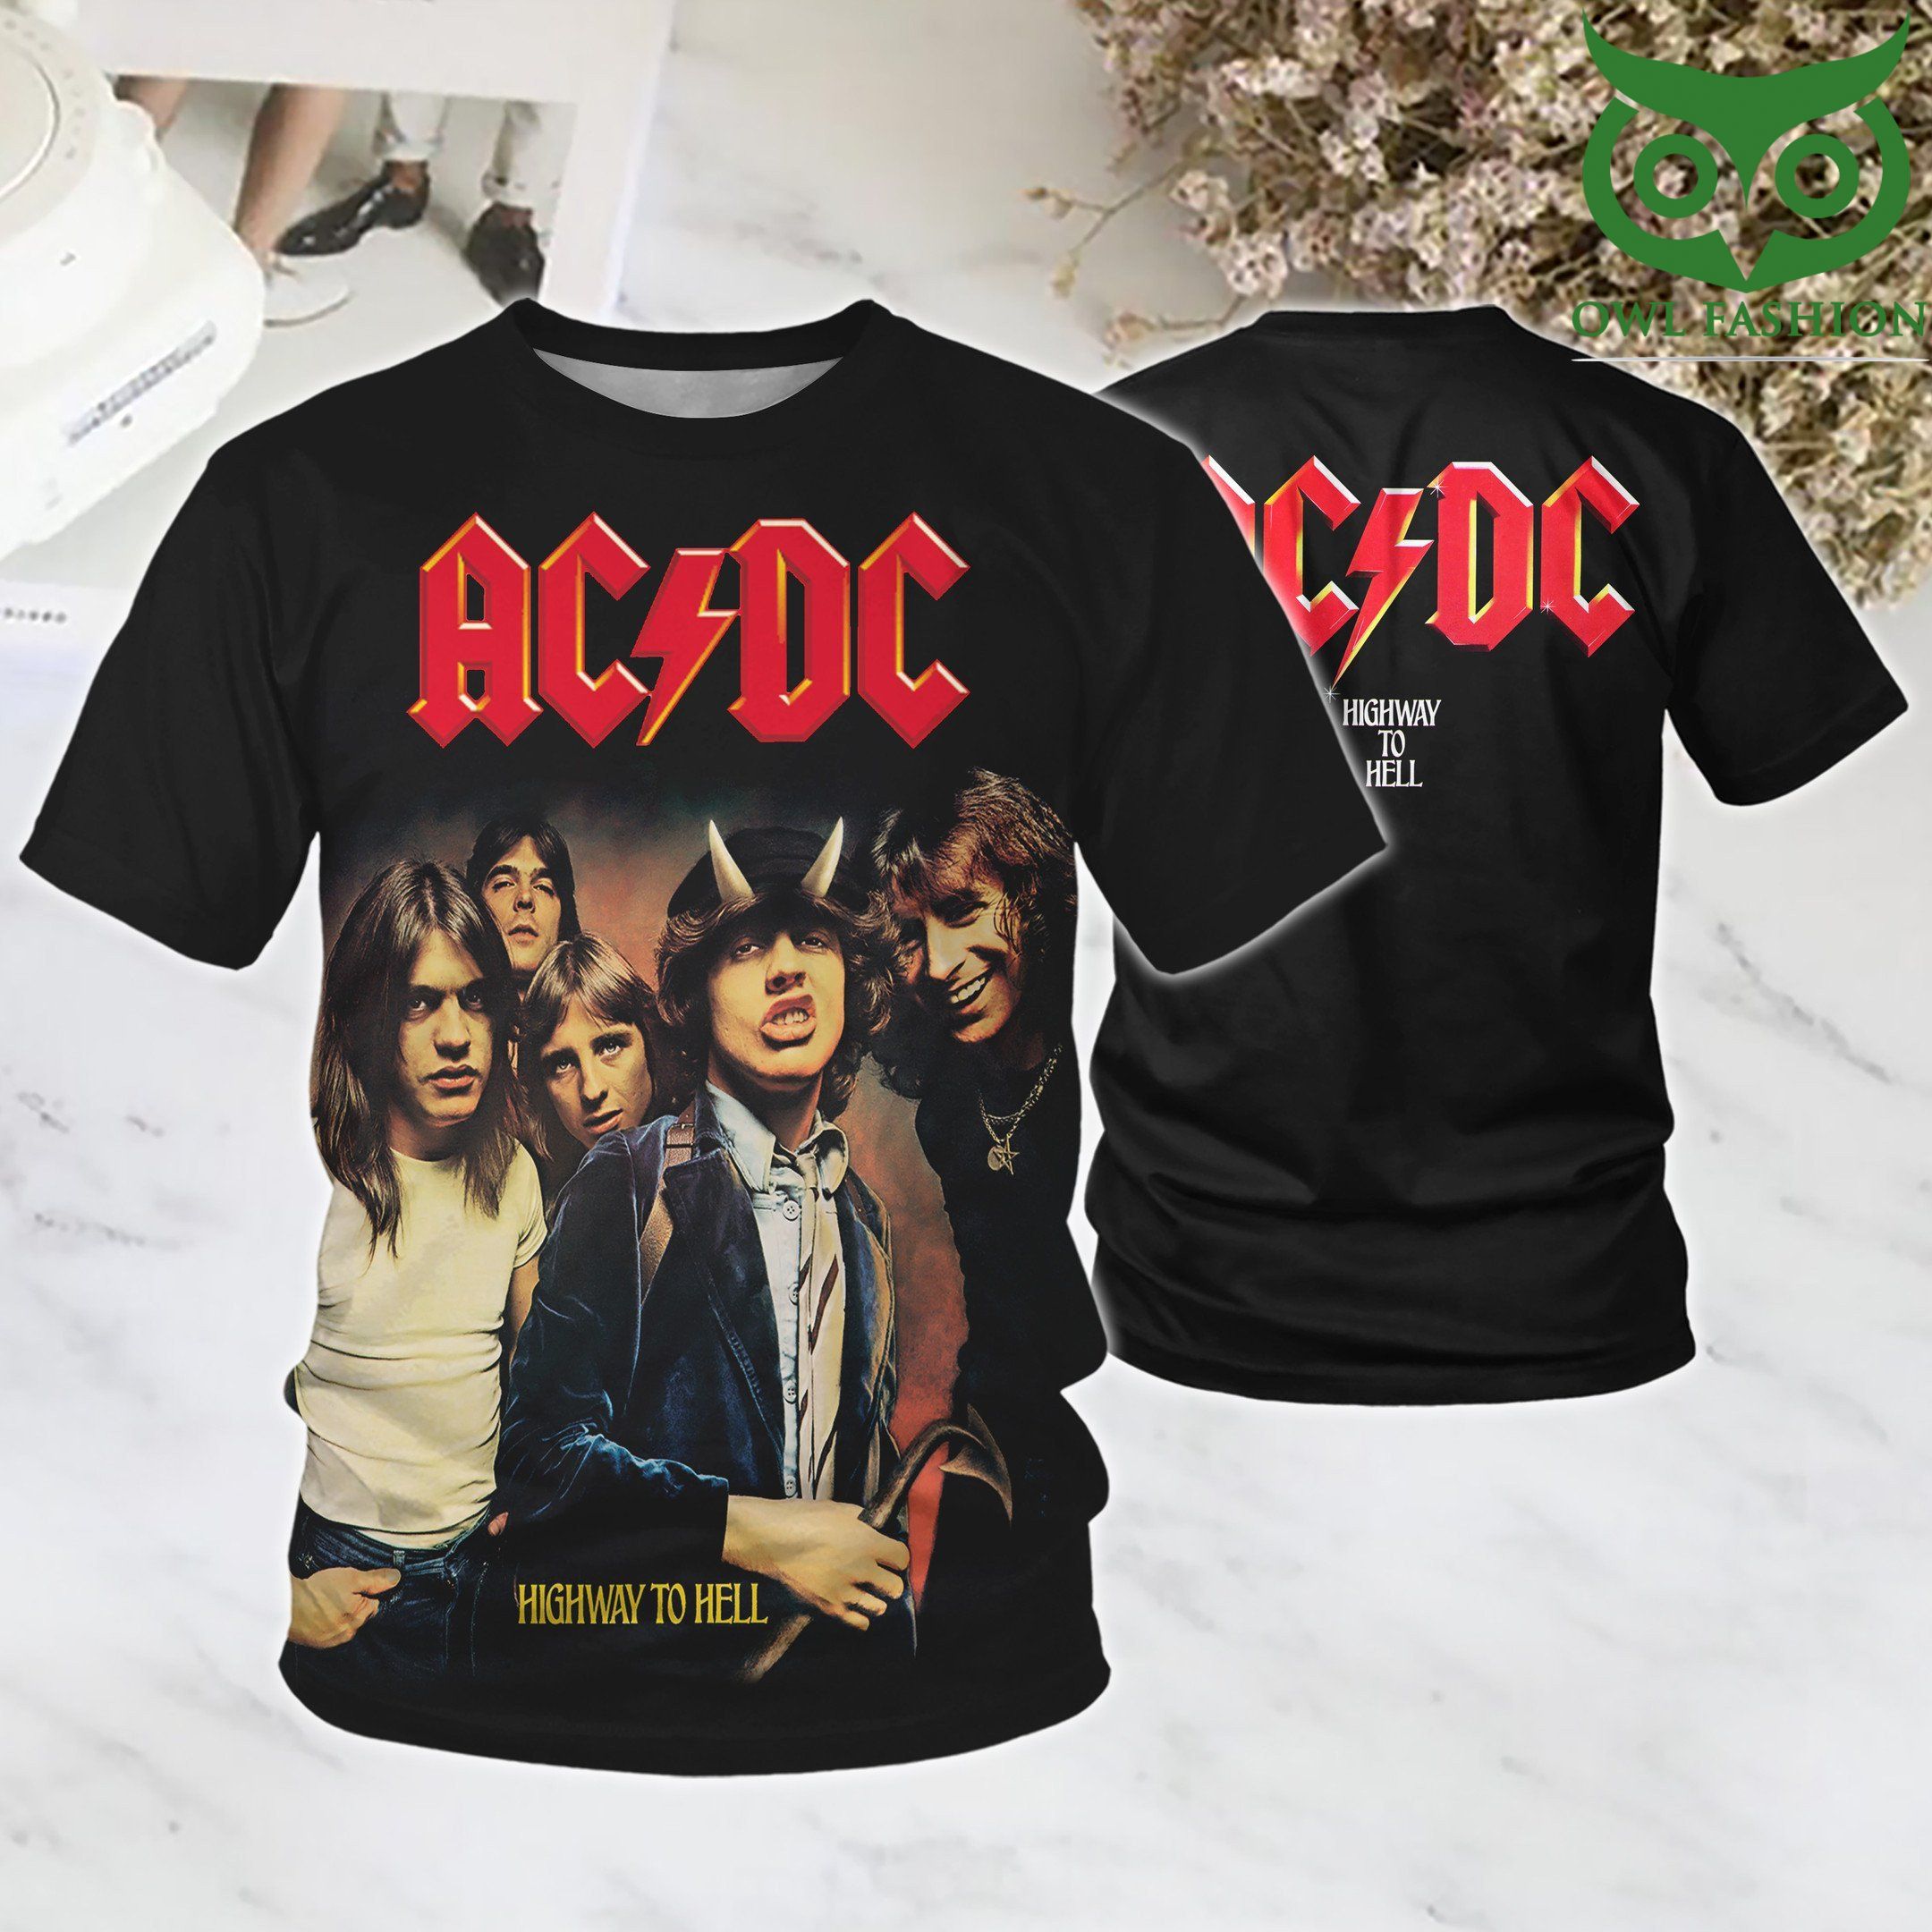 8 ACDC Highway to hell black 3D Printed T Shirt